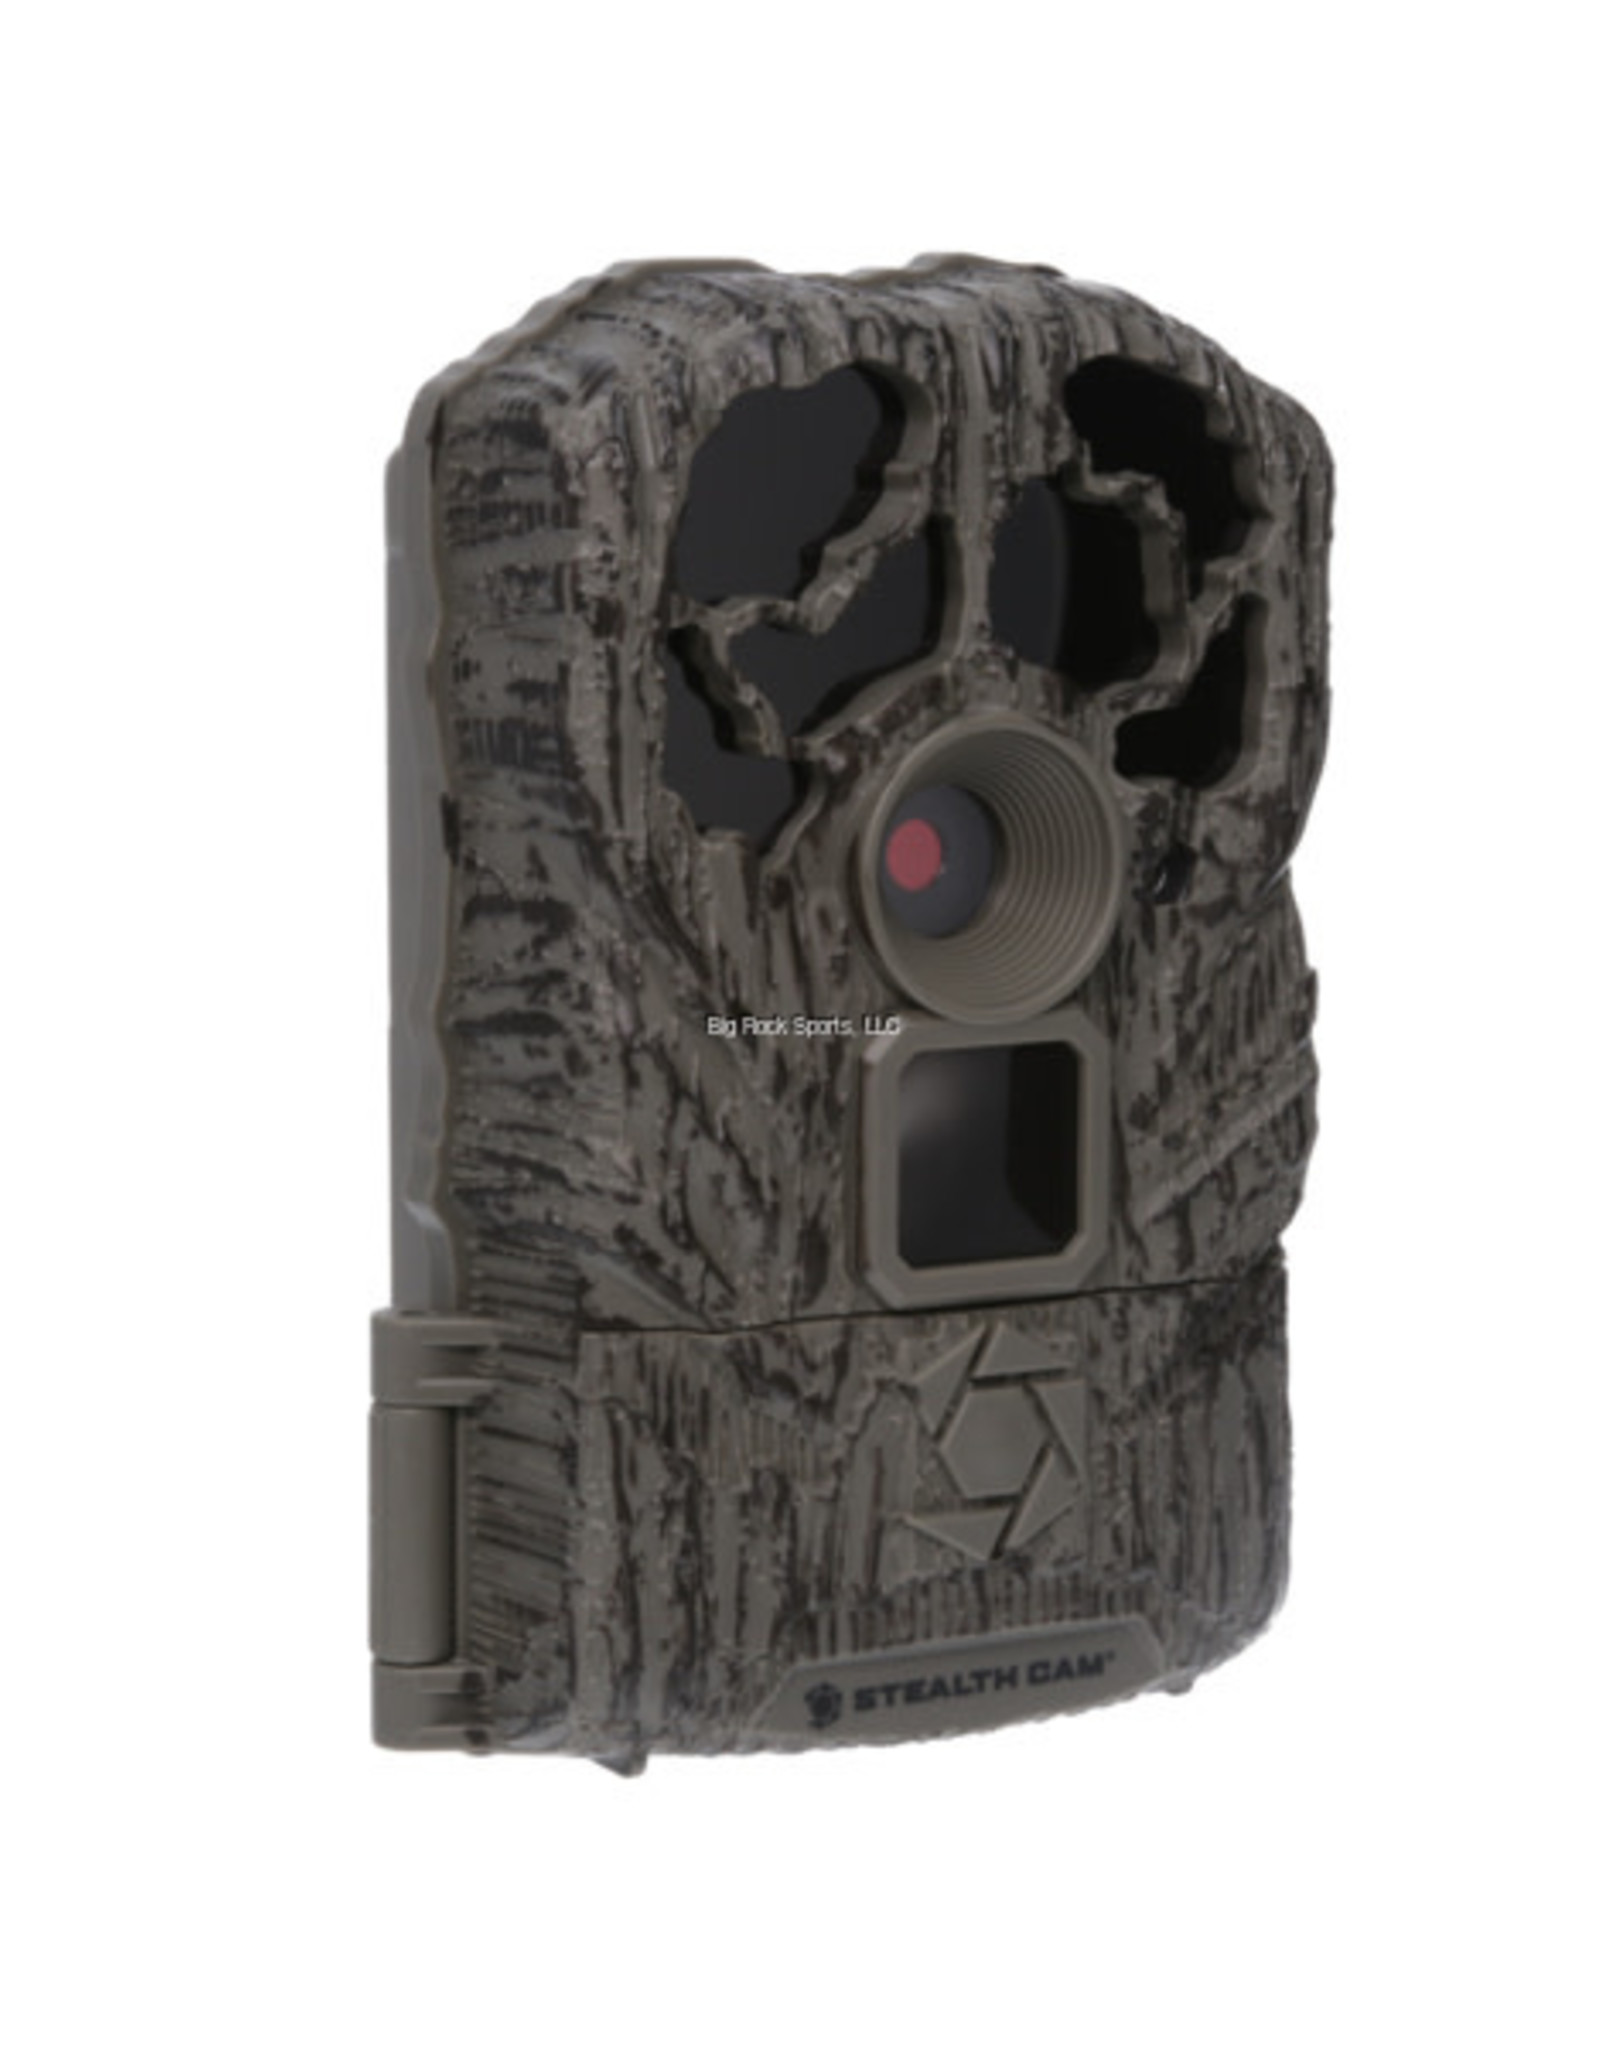 Stealth Cam Stealth Cam STC-BT16K Browtine Camera Combo, 16 MP & 480 Video 30FPS /.8 sec Trigger Speed/18 IR Emitters, Includes 16GB SD Card & Batteries